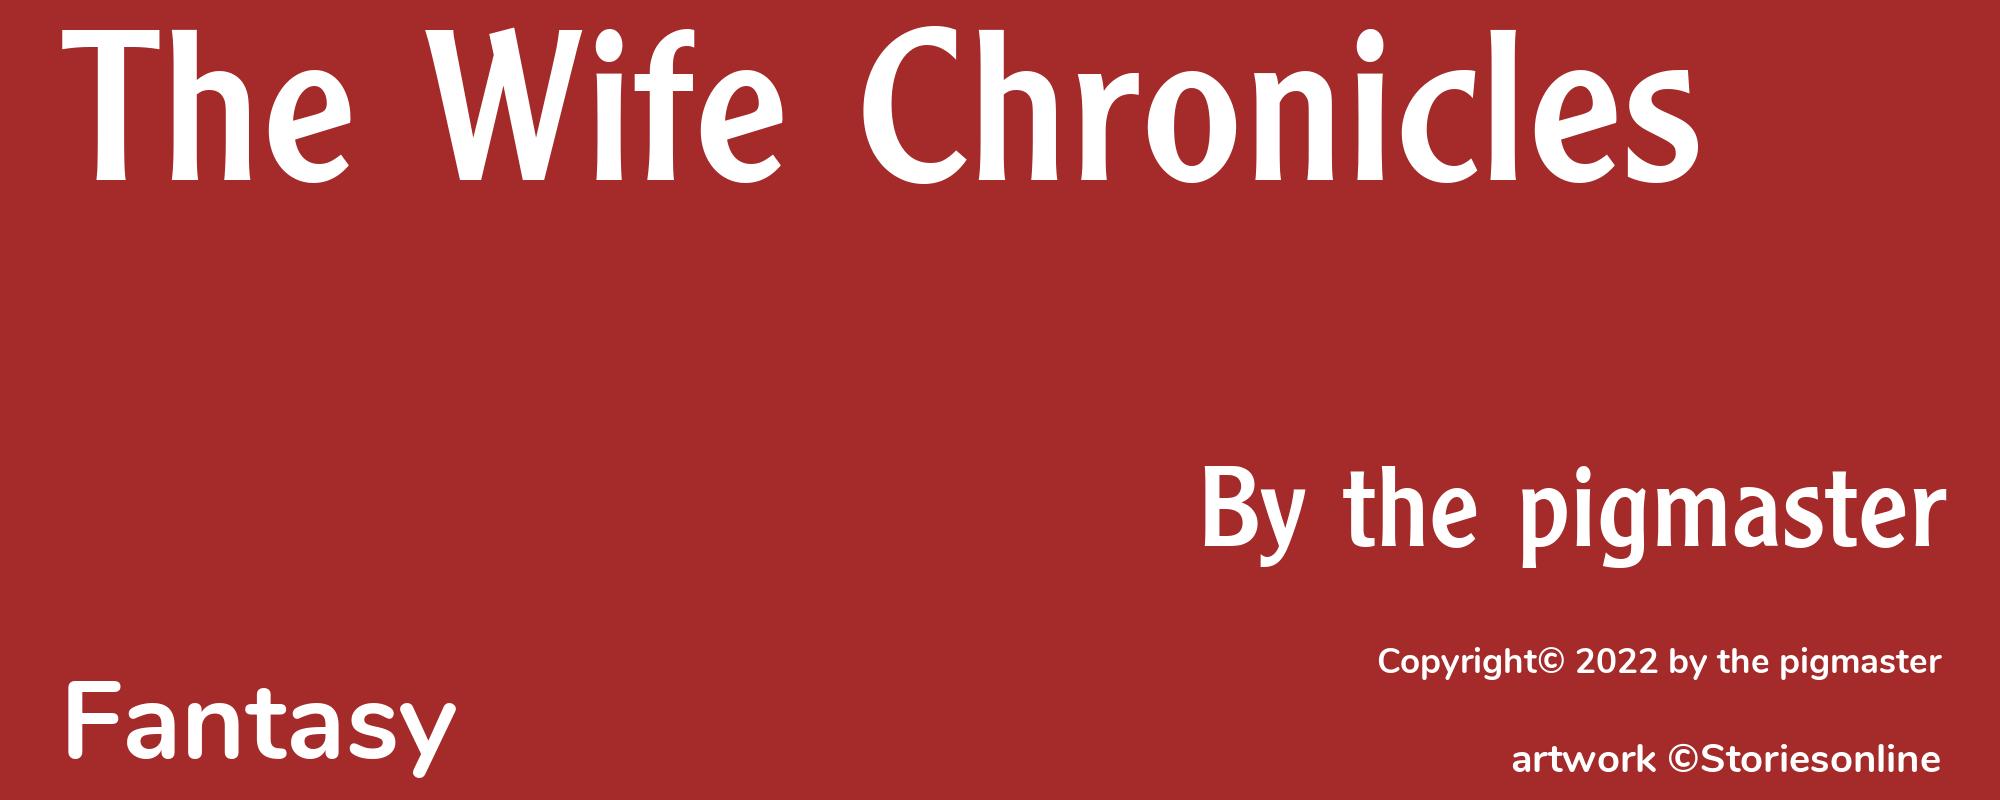 The Wife Chronicles - Cover